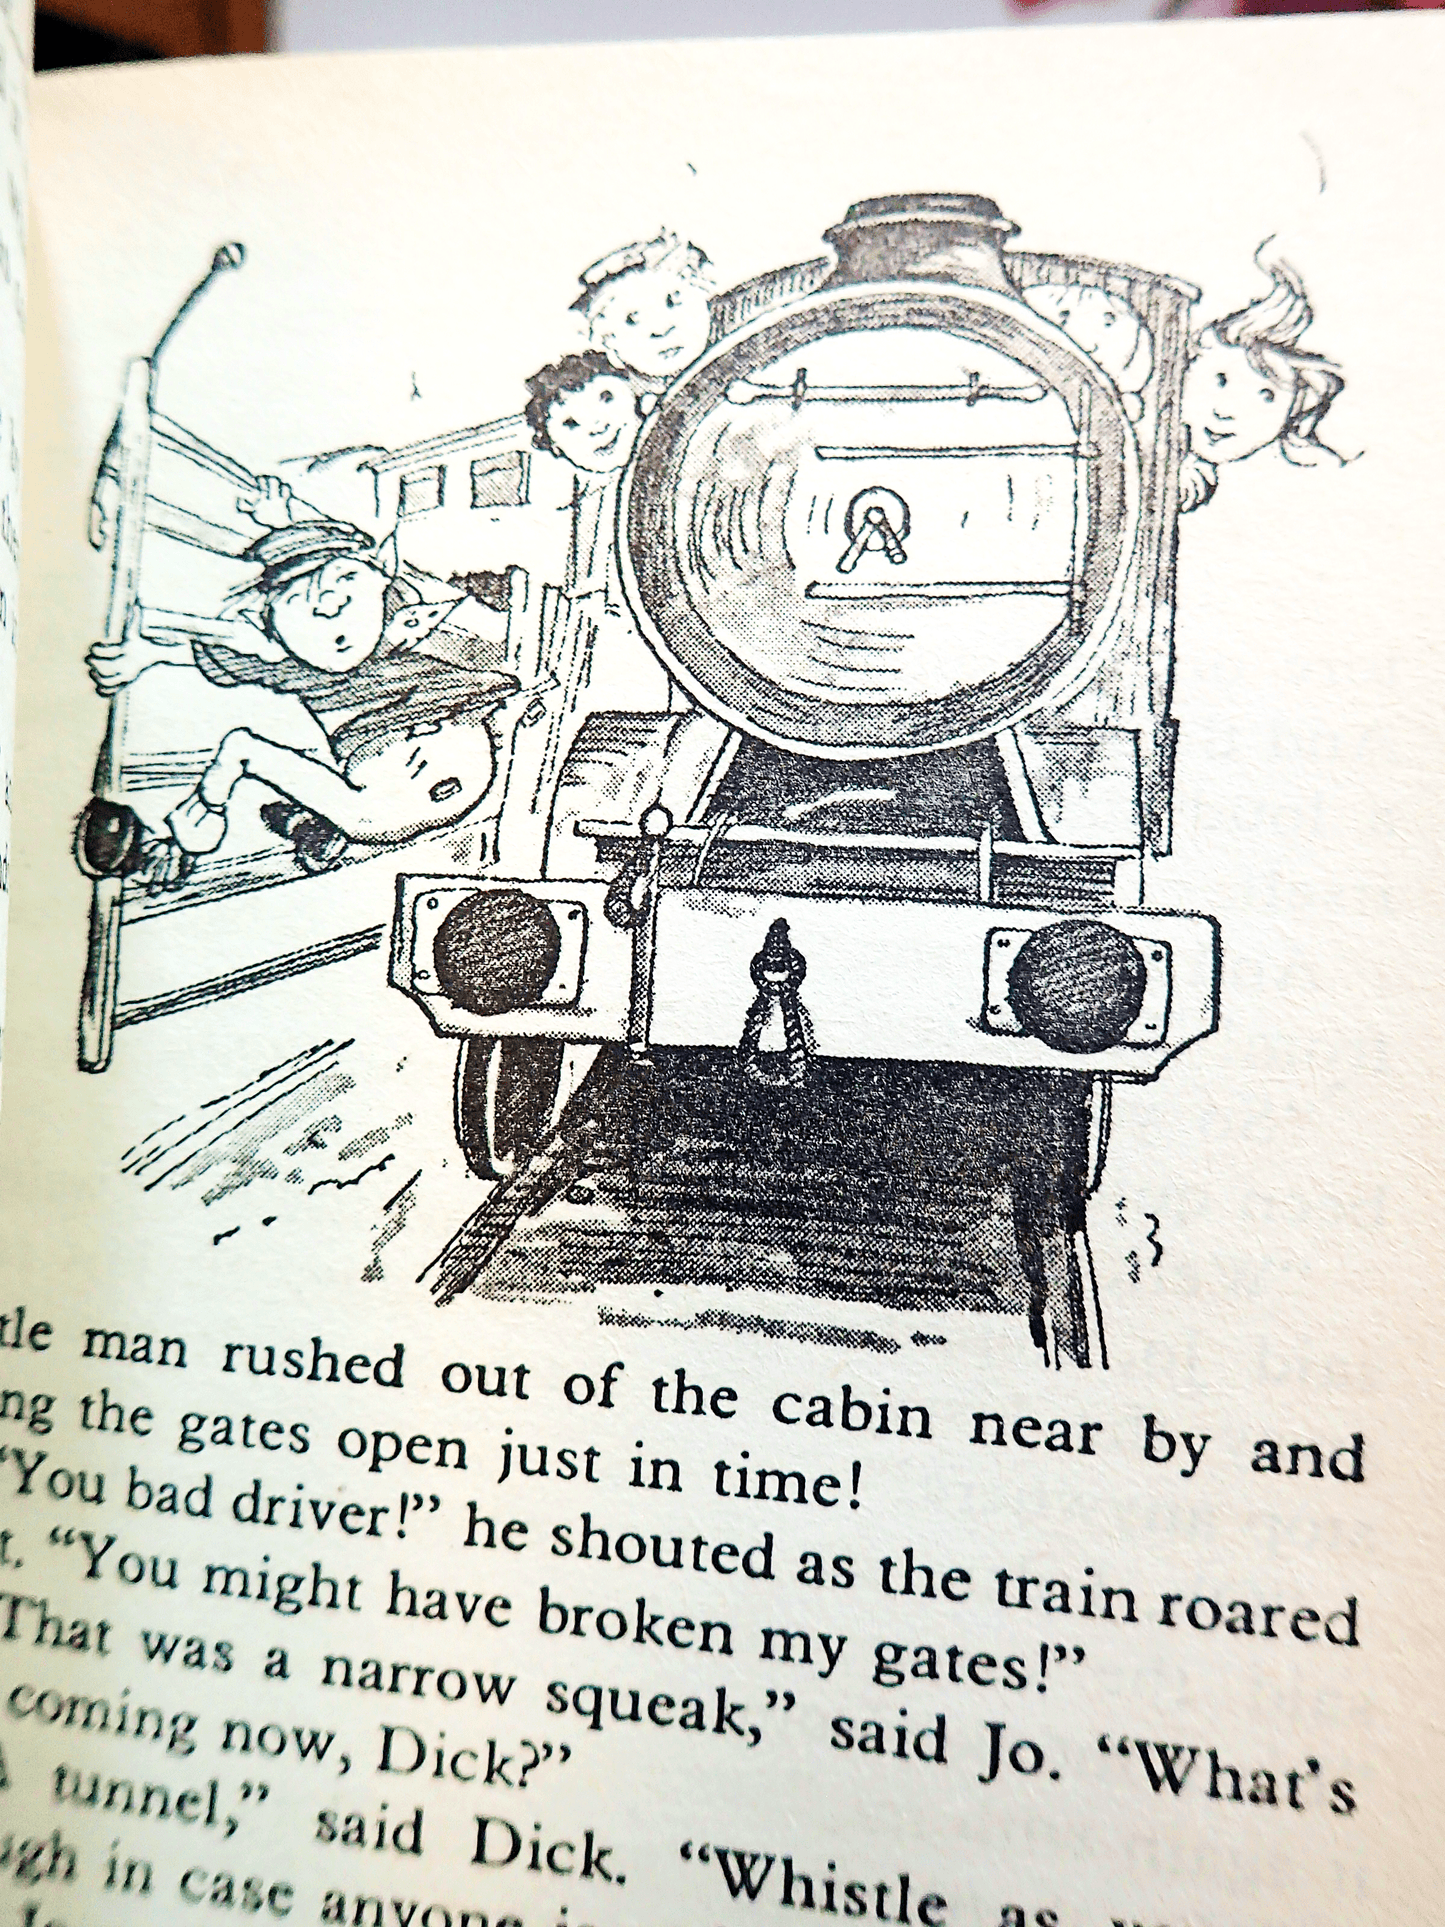 Illustration from The Magic Faraway Tree by Enid Blyton Beaver Paperback Vintage Children's Book 1980's showing children and a pixie on a magical train. 